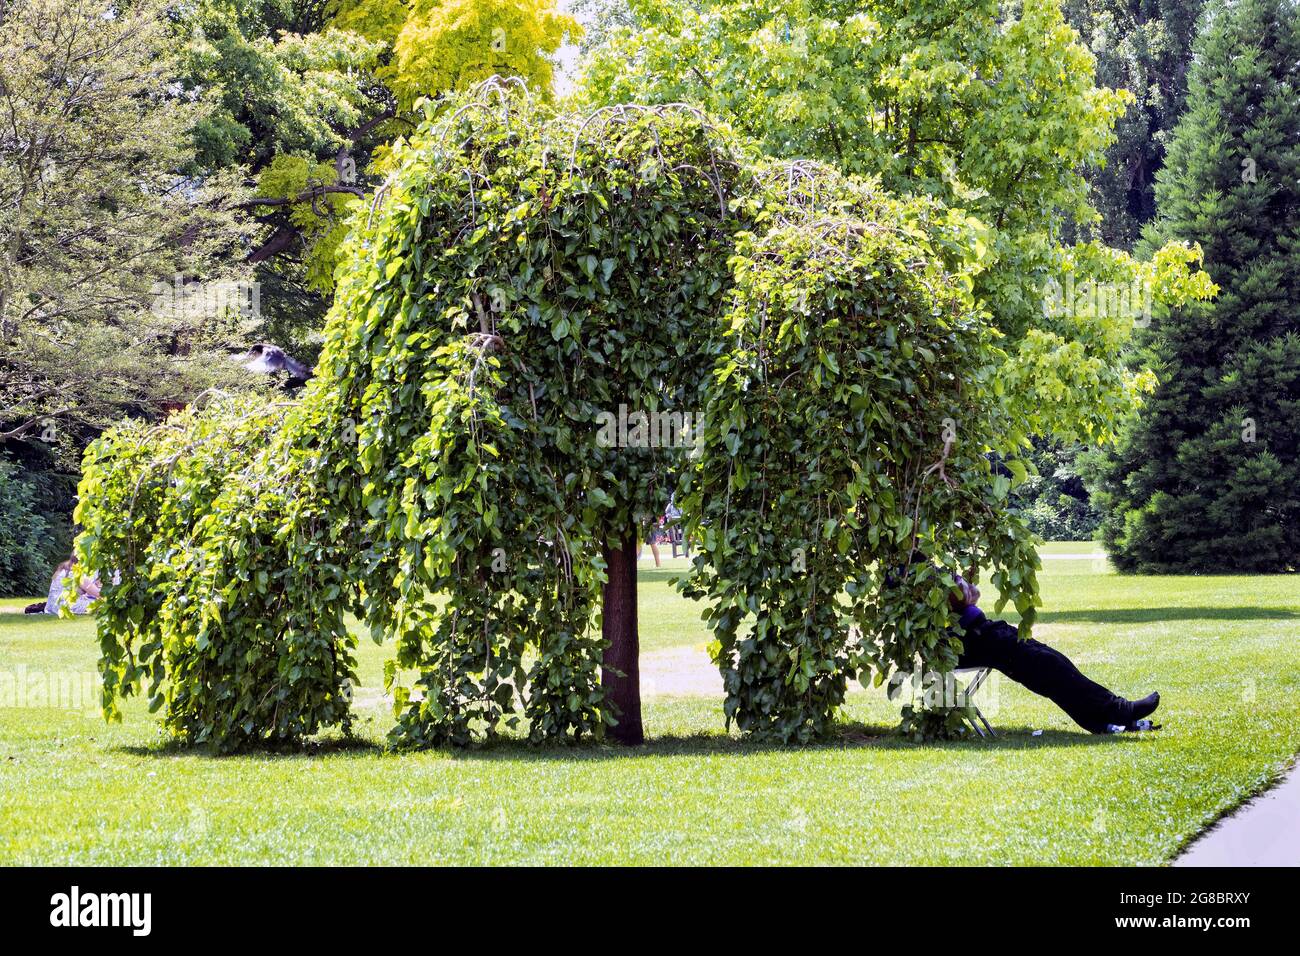 Need for shade, visitor to Regents Park in London sits under a tree in heatwave. Stock Photo